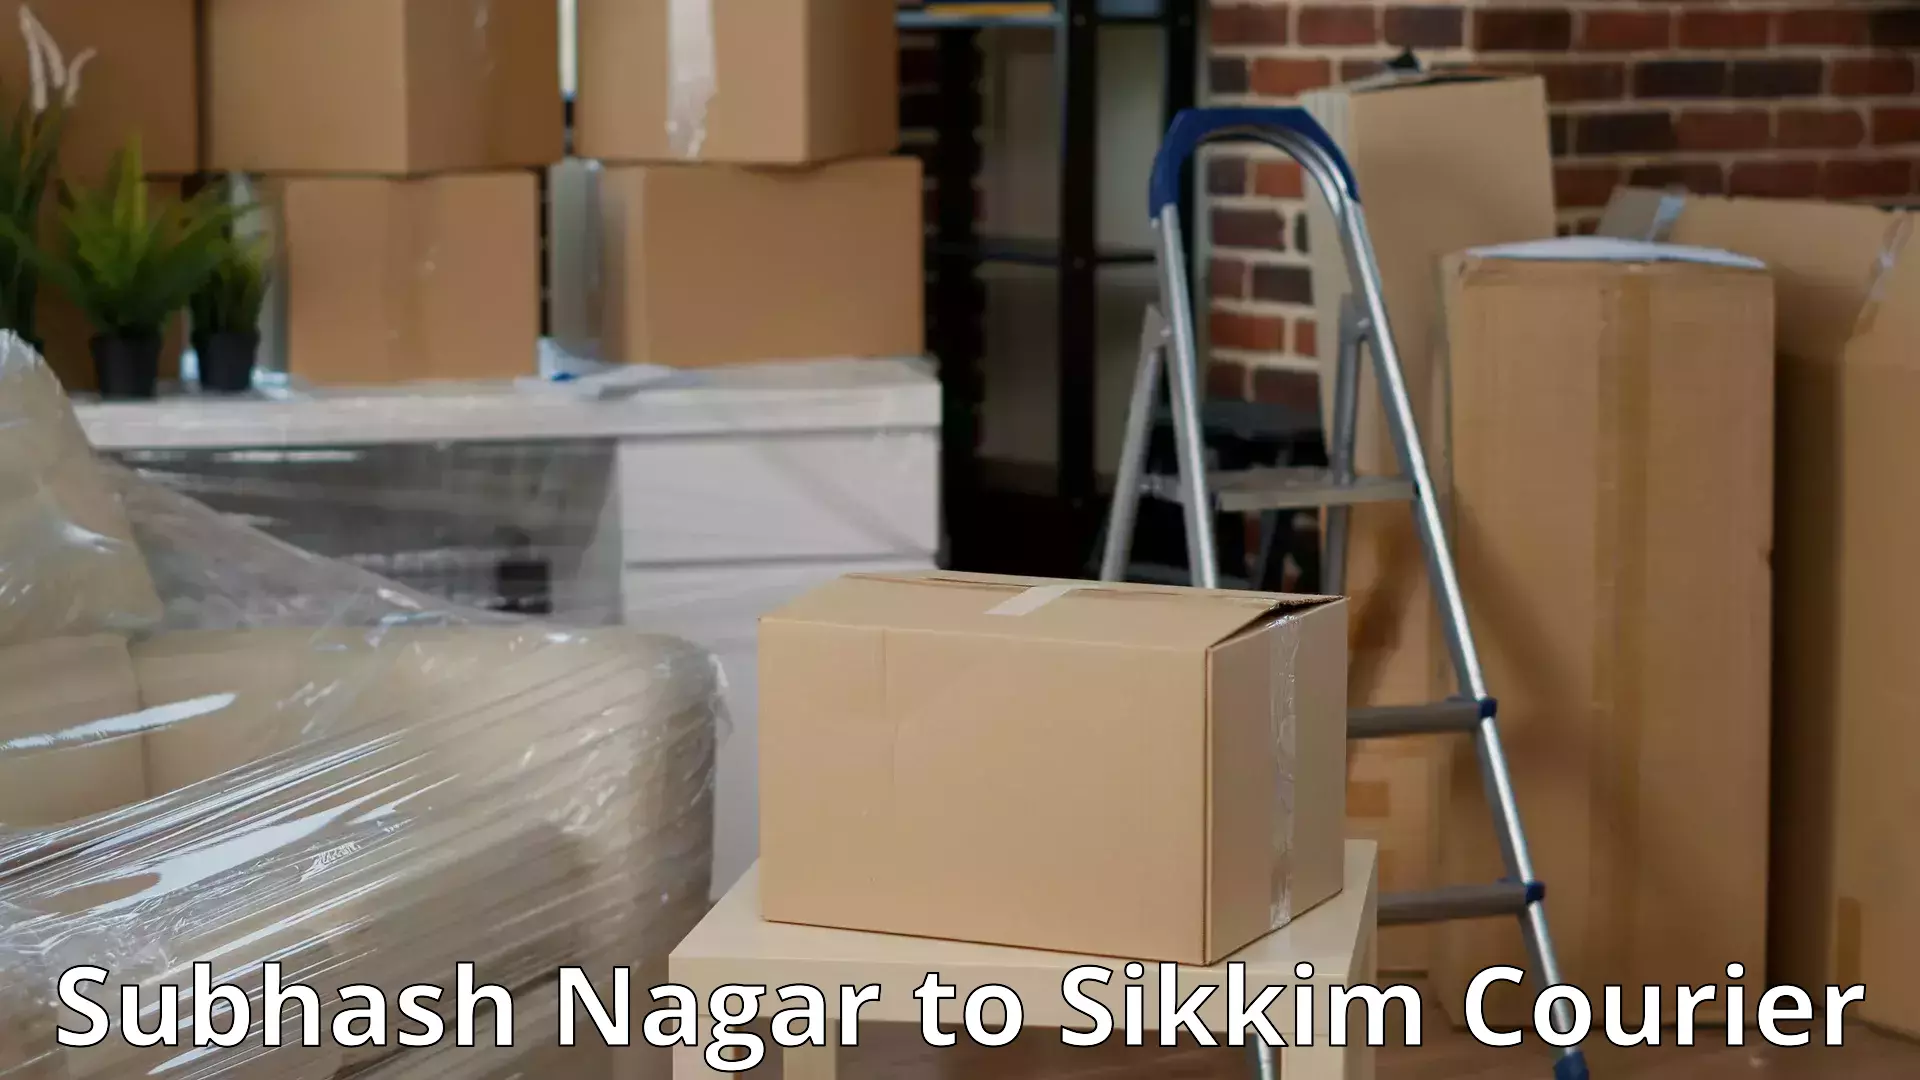 Trusted moving company Subhash Nagar to Pelling